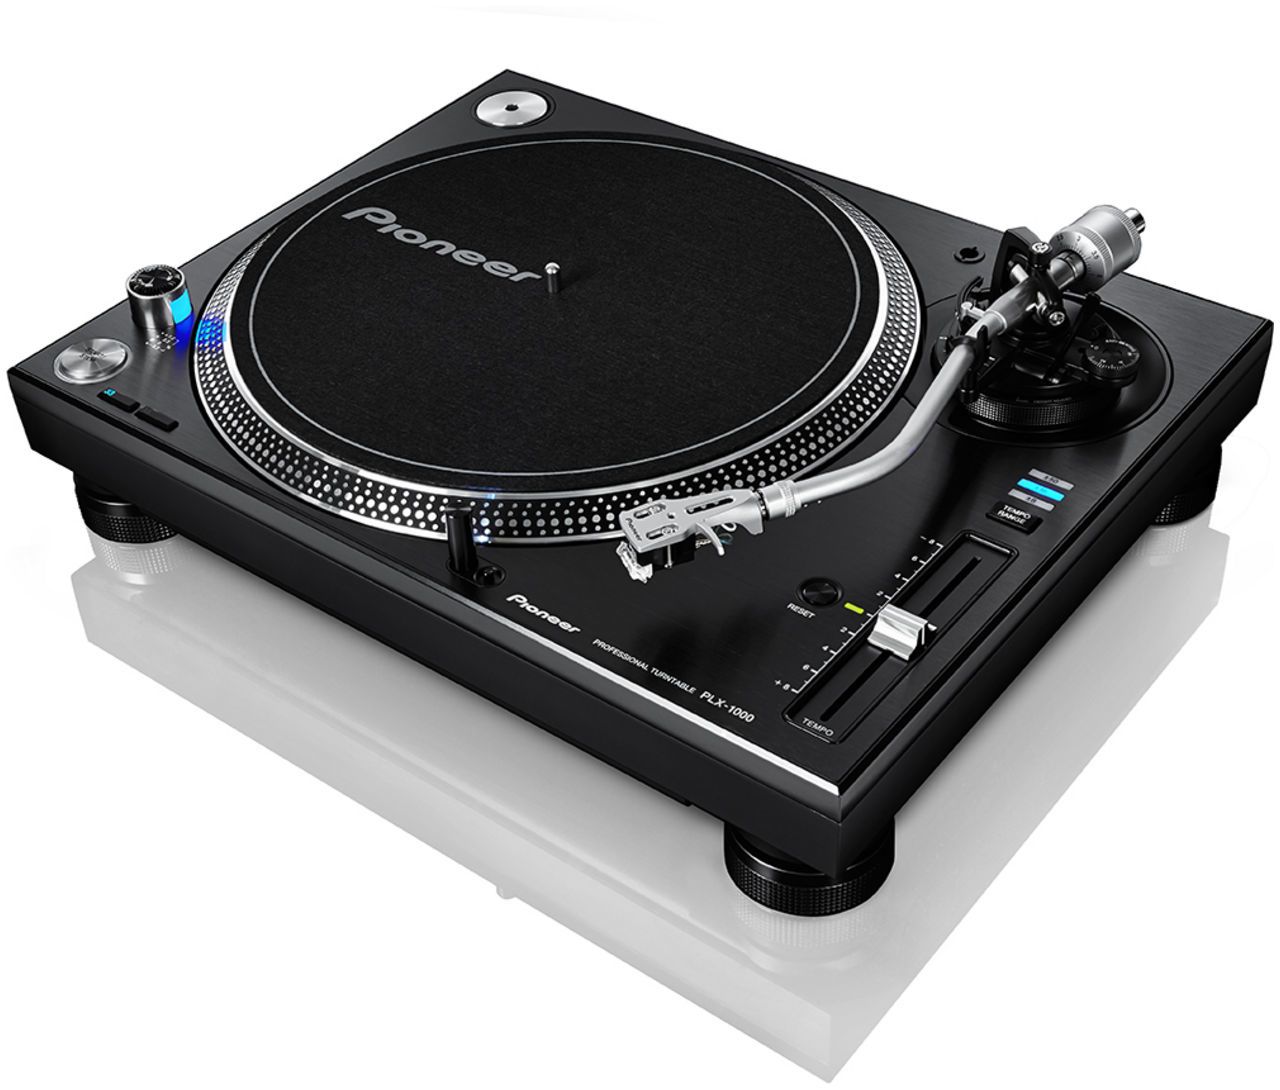 The new CDJ PLX-1000 From Pioneer Electronics